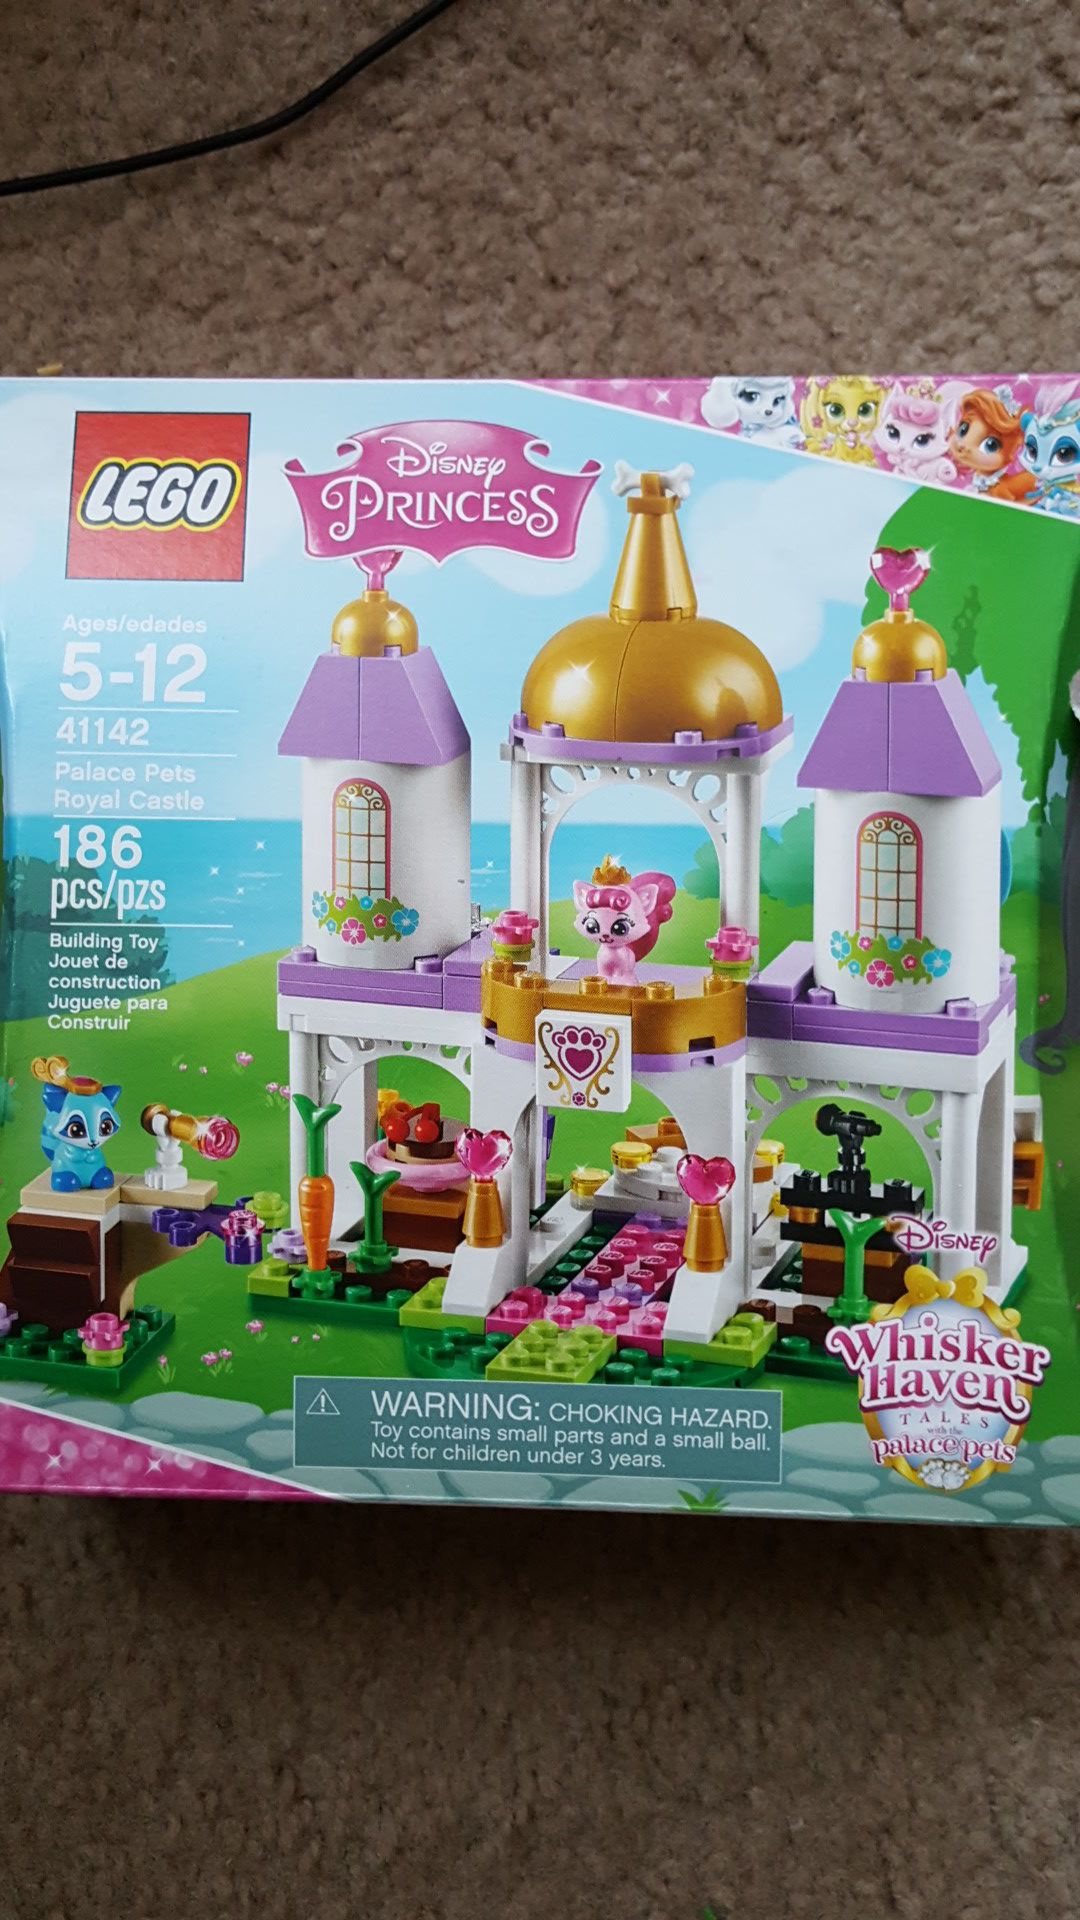 Lego -41142 Disney Whisker Haven Tales with the Palace Pets